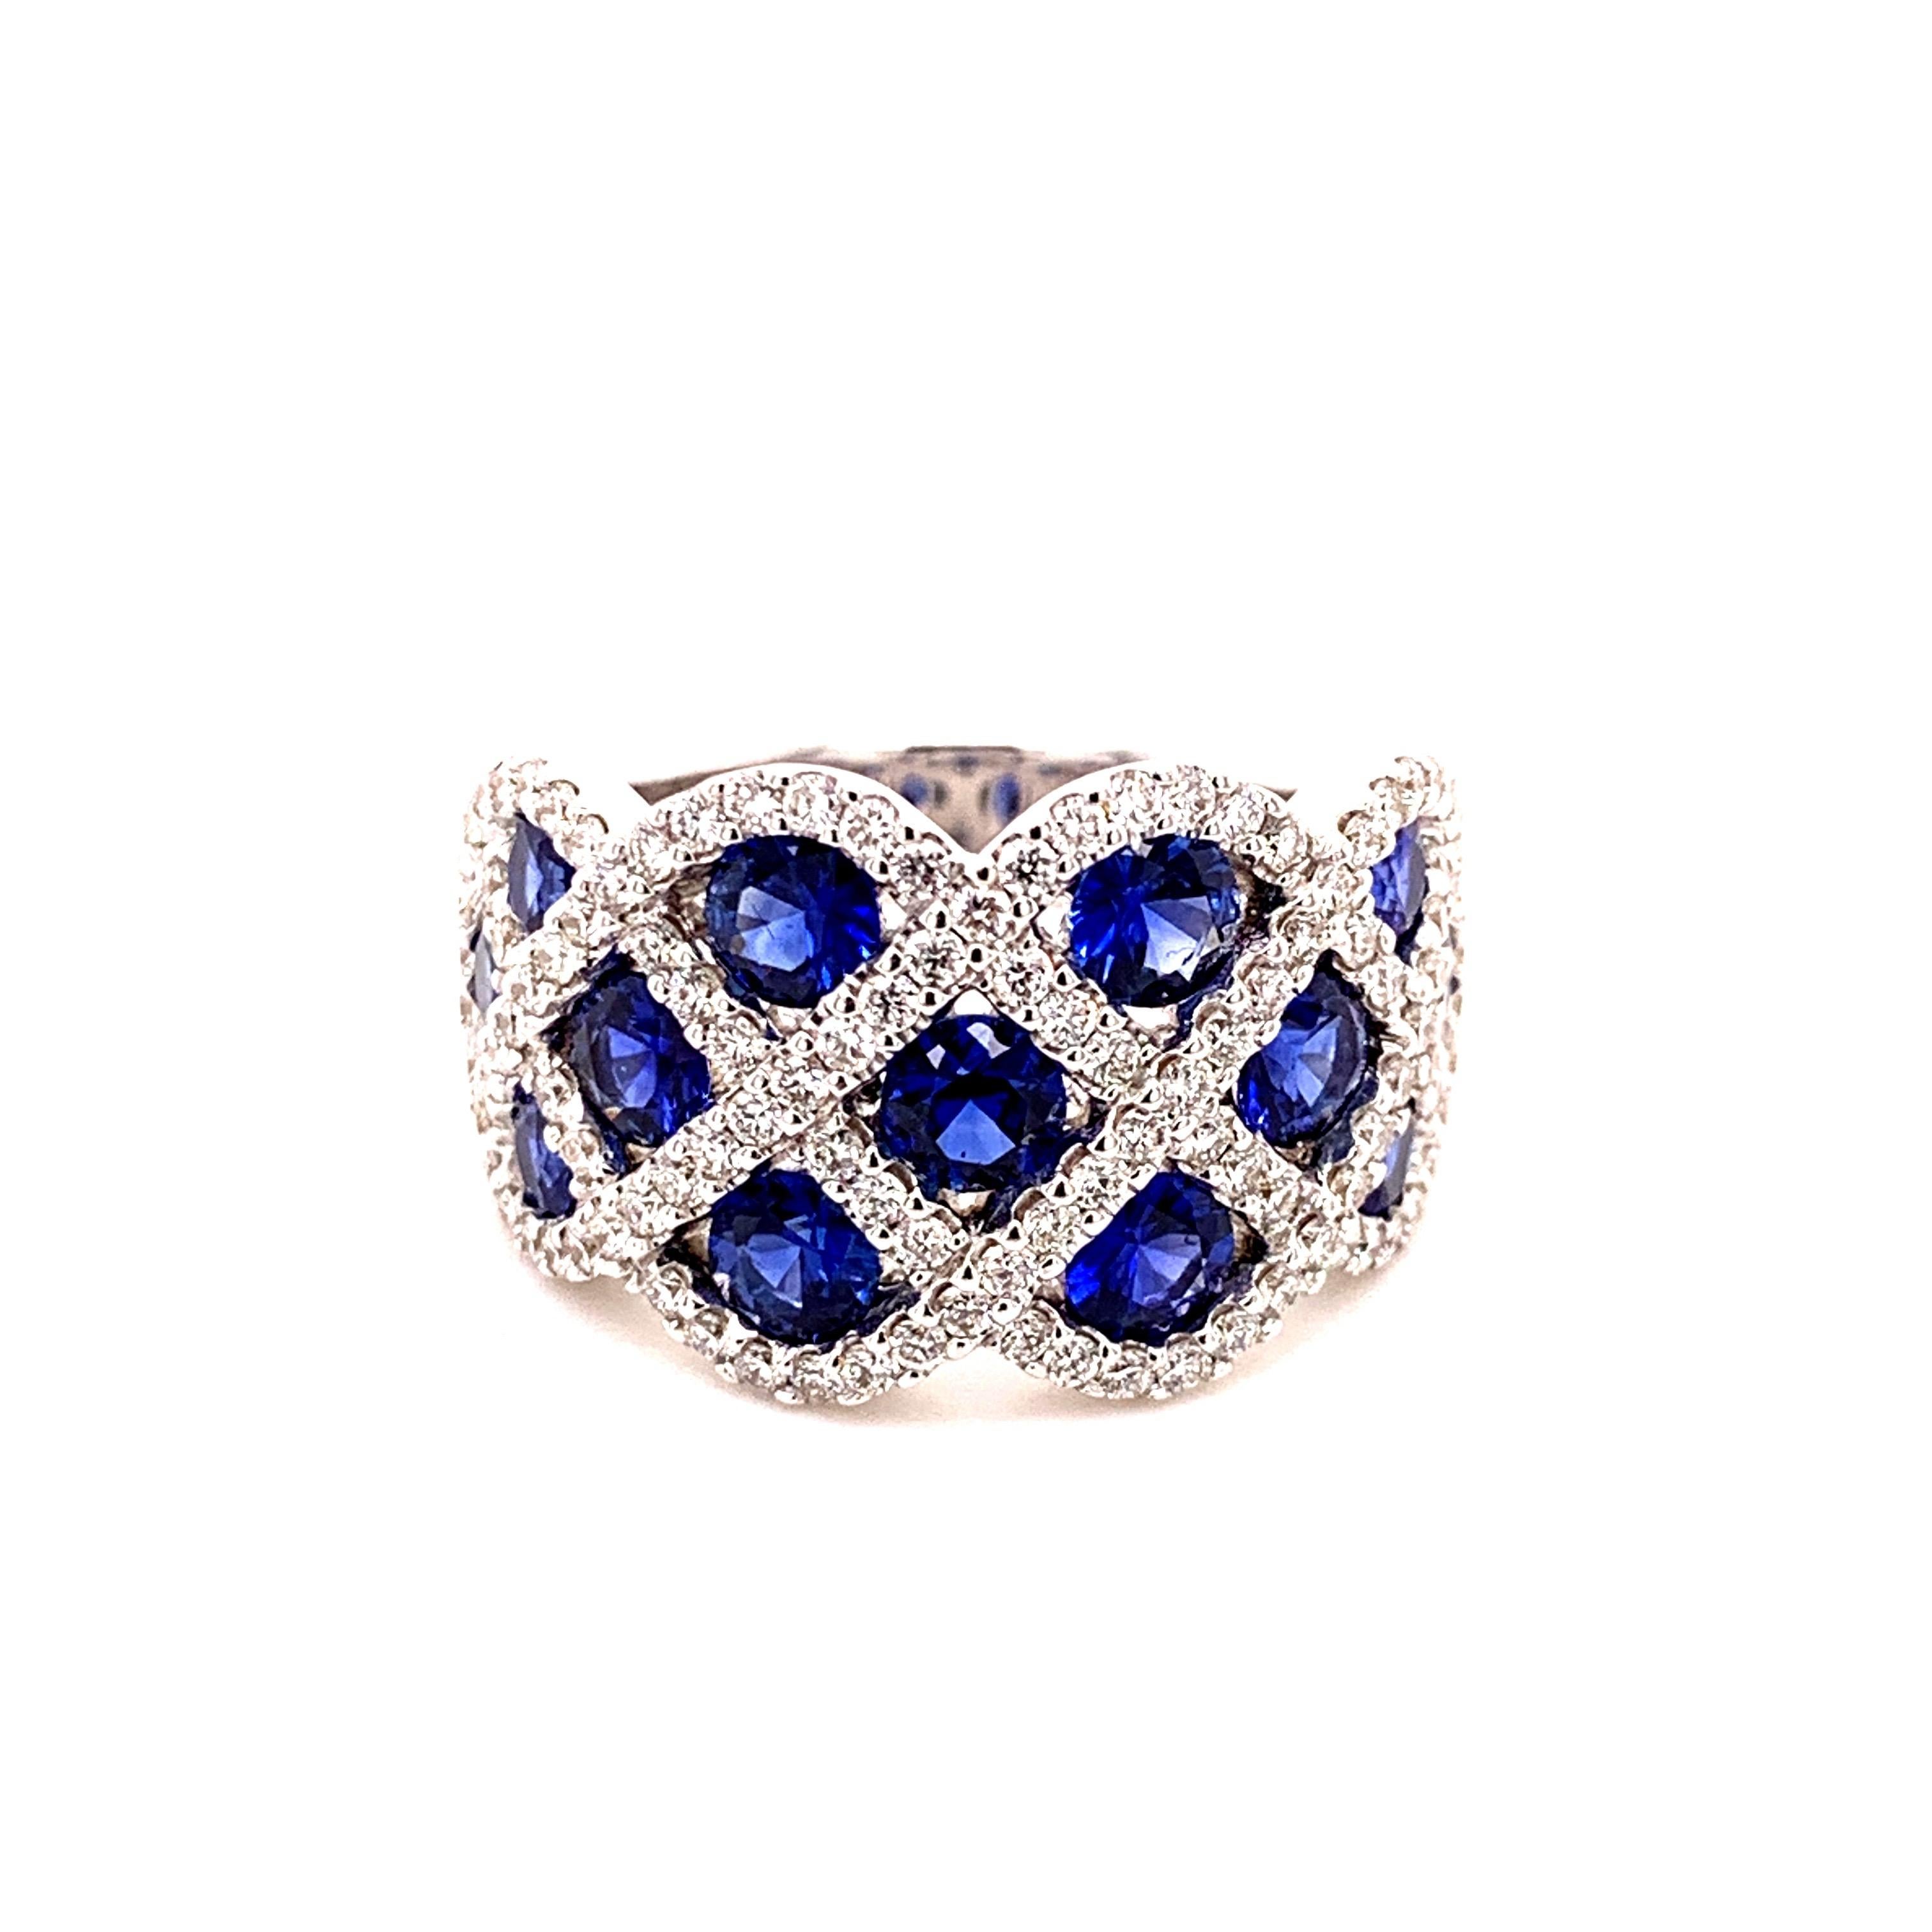 Stunning checkered design sapphire diamond ring. High lustre, round brilliant cut, 2.27 carats, natural royal blue sapphires encased in the invisible mount, accented with round brilliant cut diamonds. Contemporary handcrafted tapered band ring